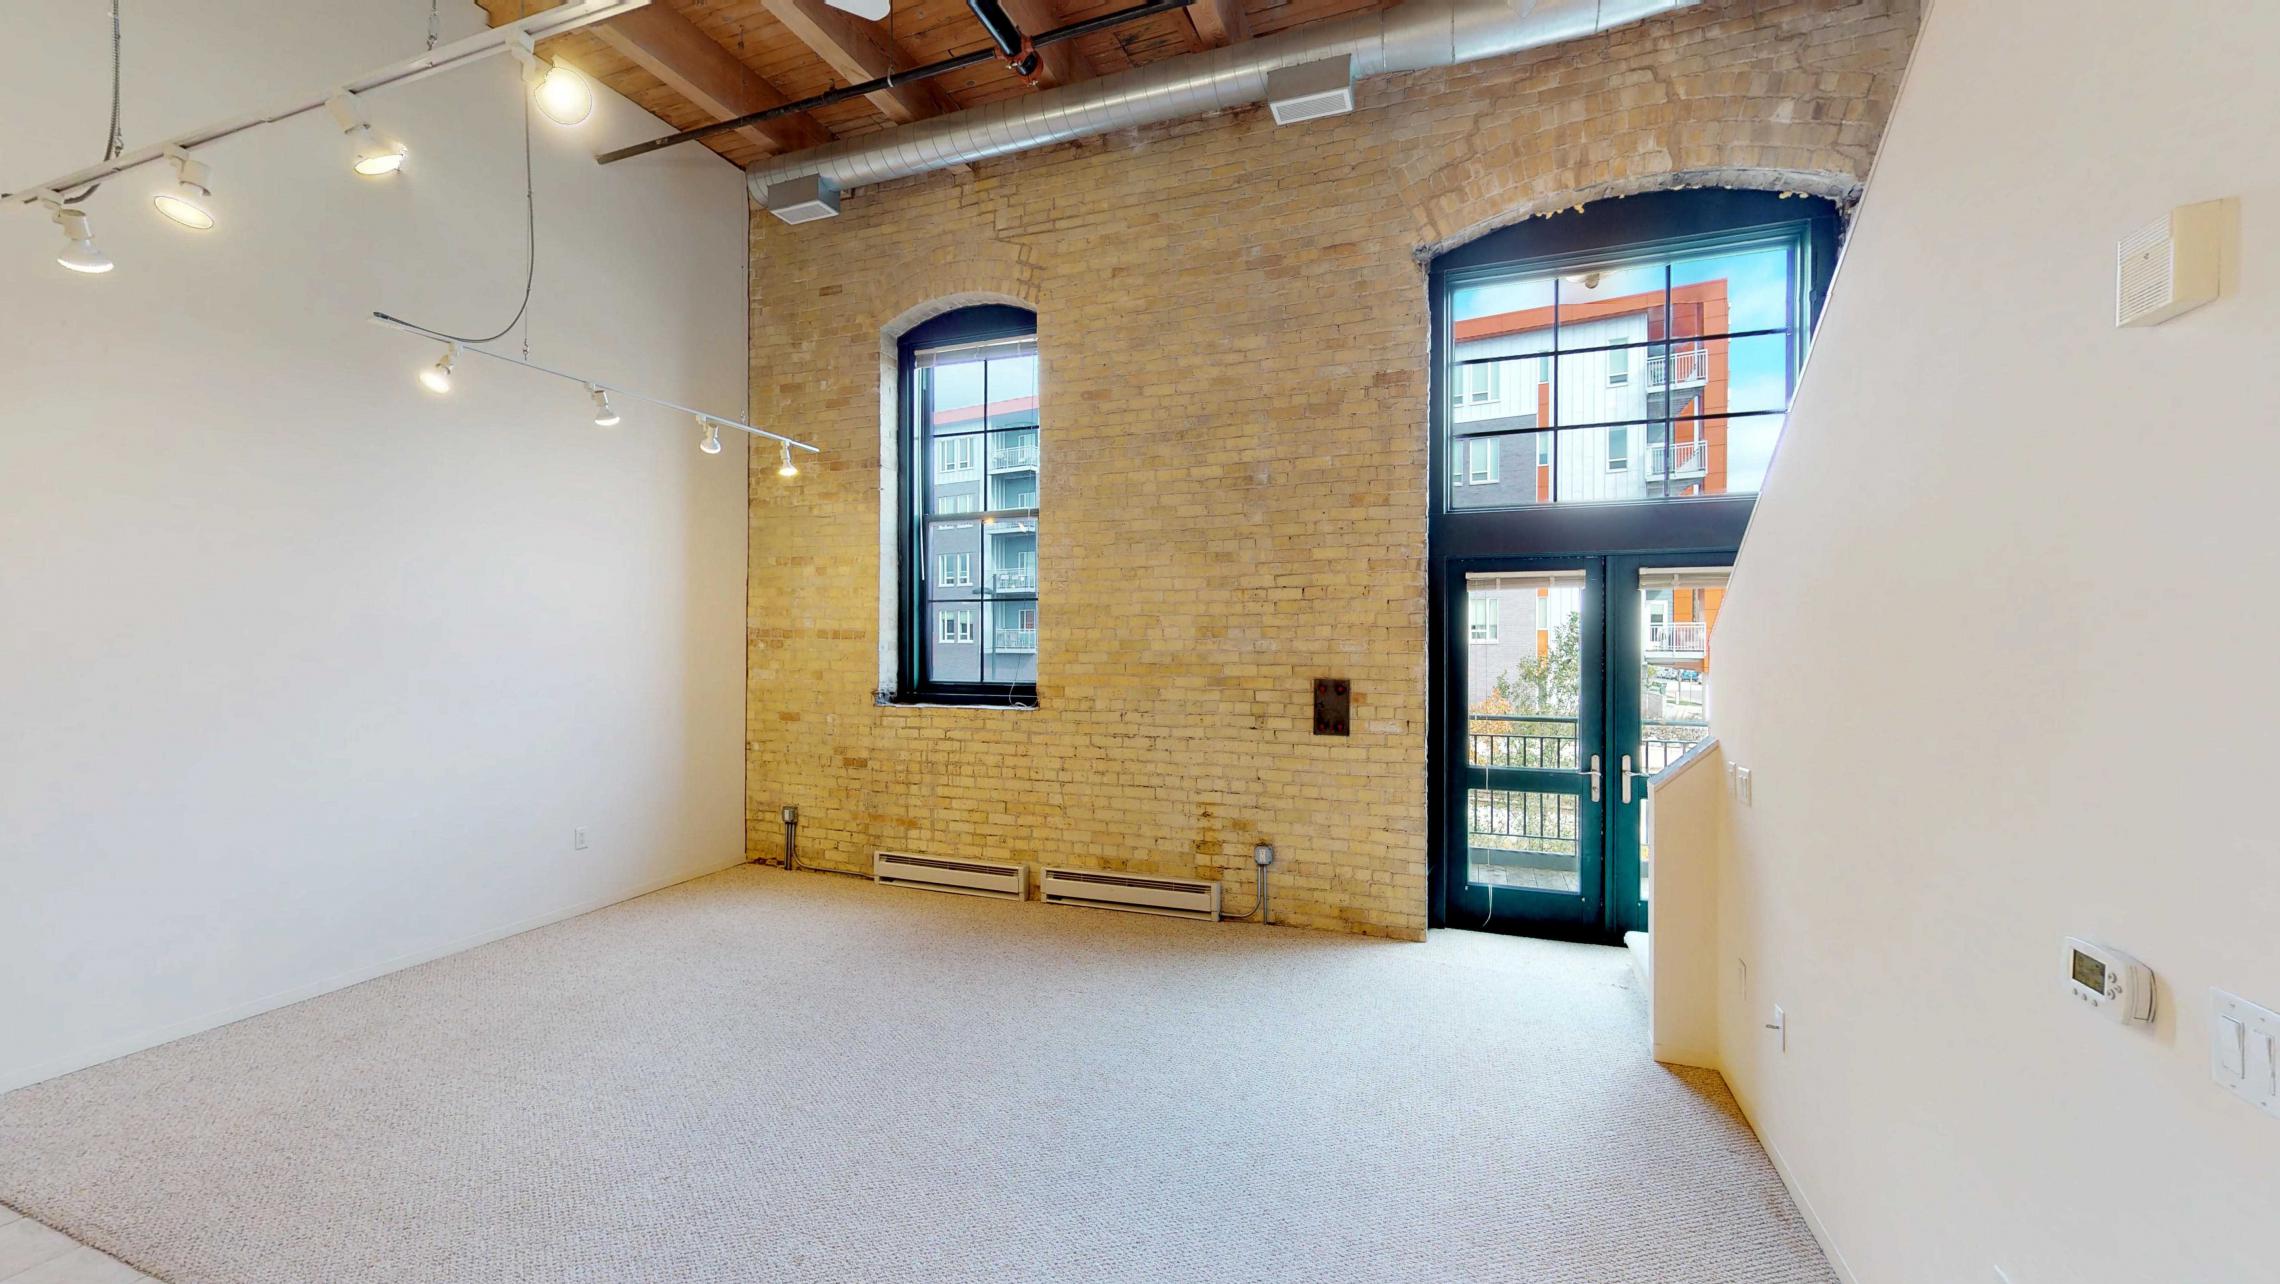 Tobacco-Lofts-E203-Two-bedroom-historic-design-upscale-exposed-brick-downtown-balcony-lake-view.jpg